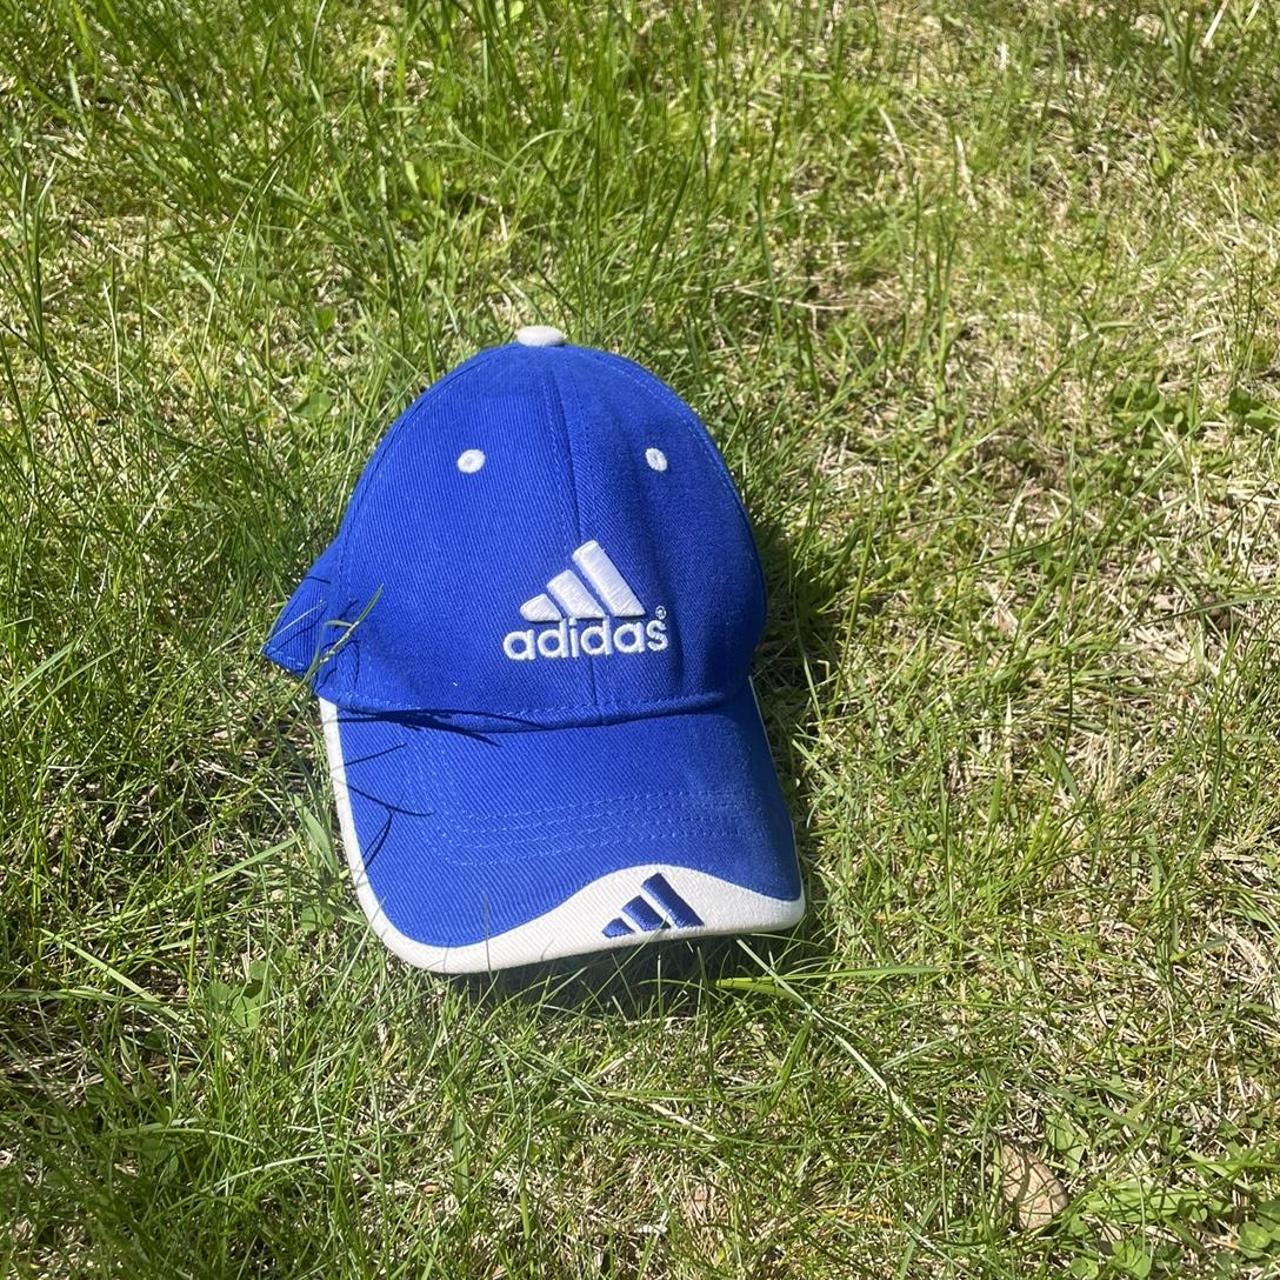 Adidas Women's Blue and White Hat | Depop